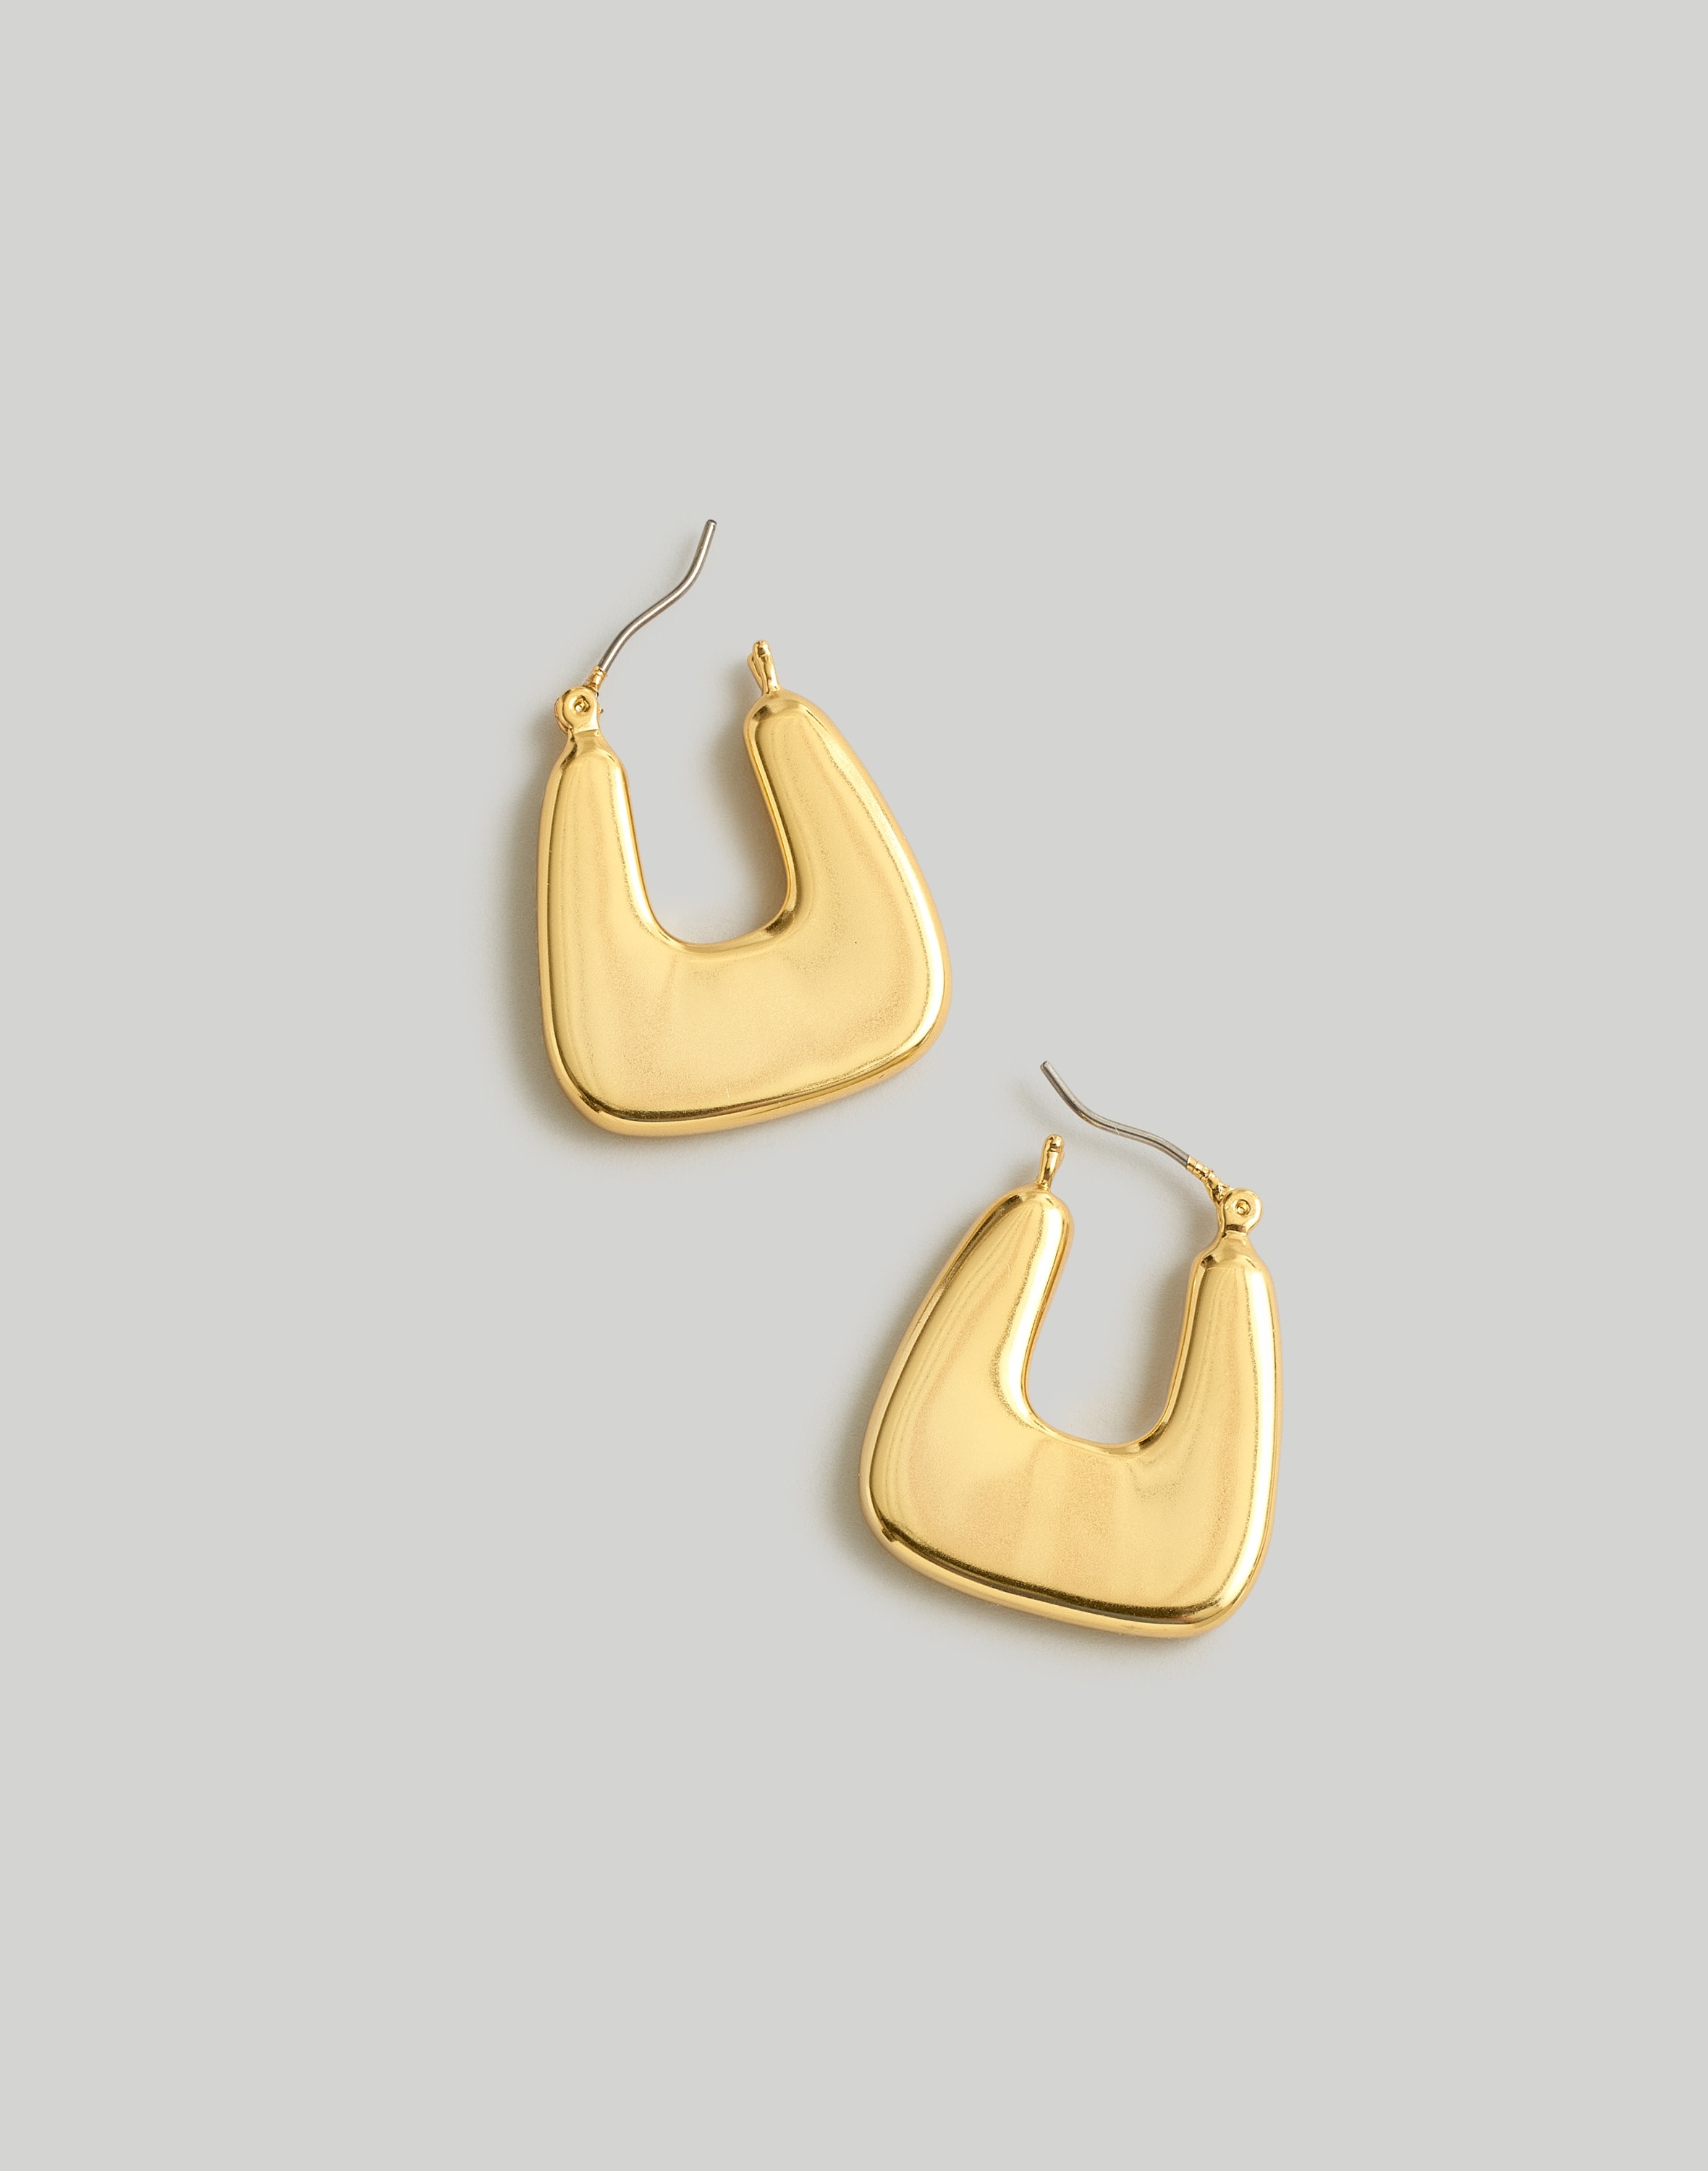 Mw Chunky Triangle Hoop Earrings In Vintage Gold